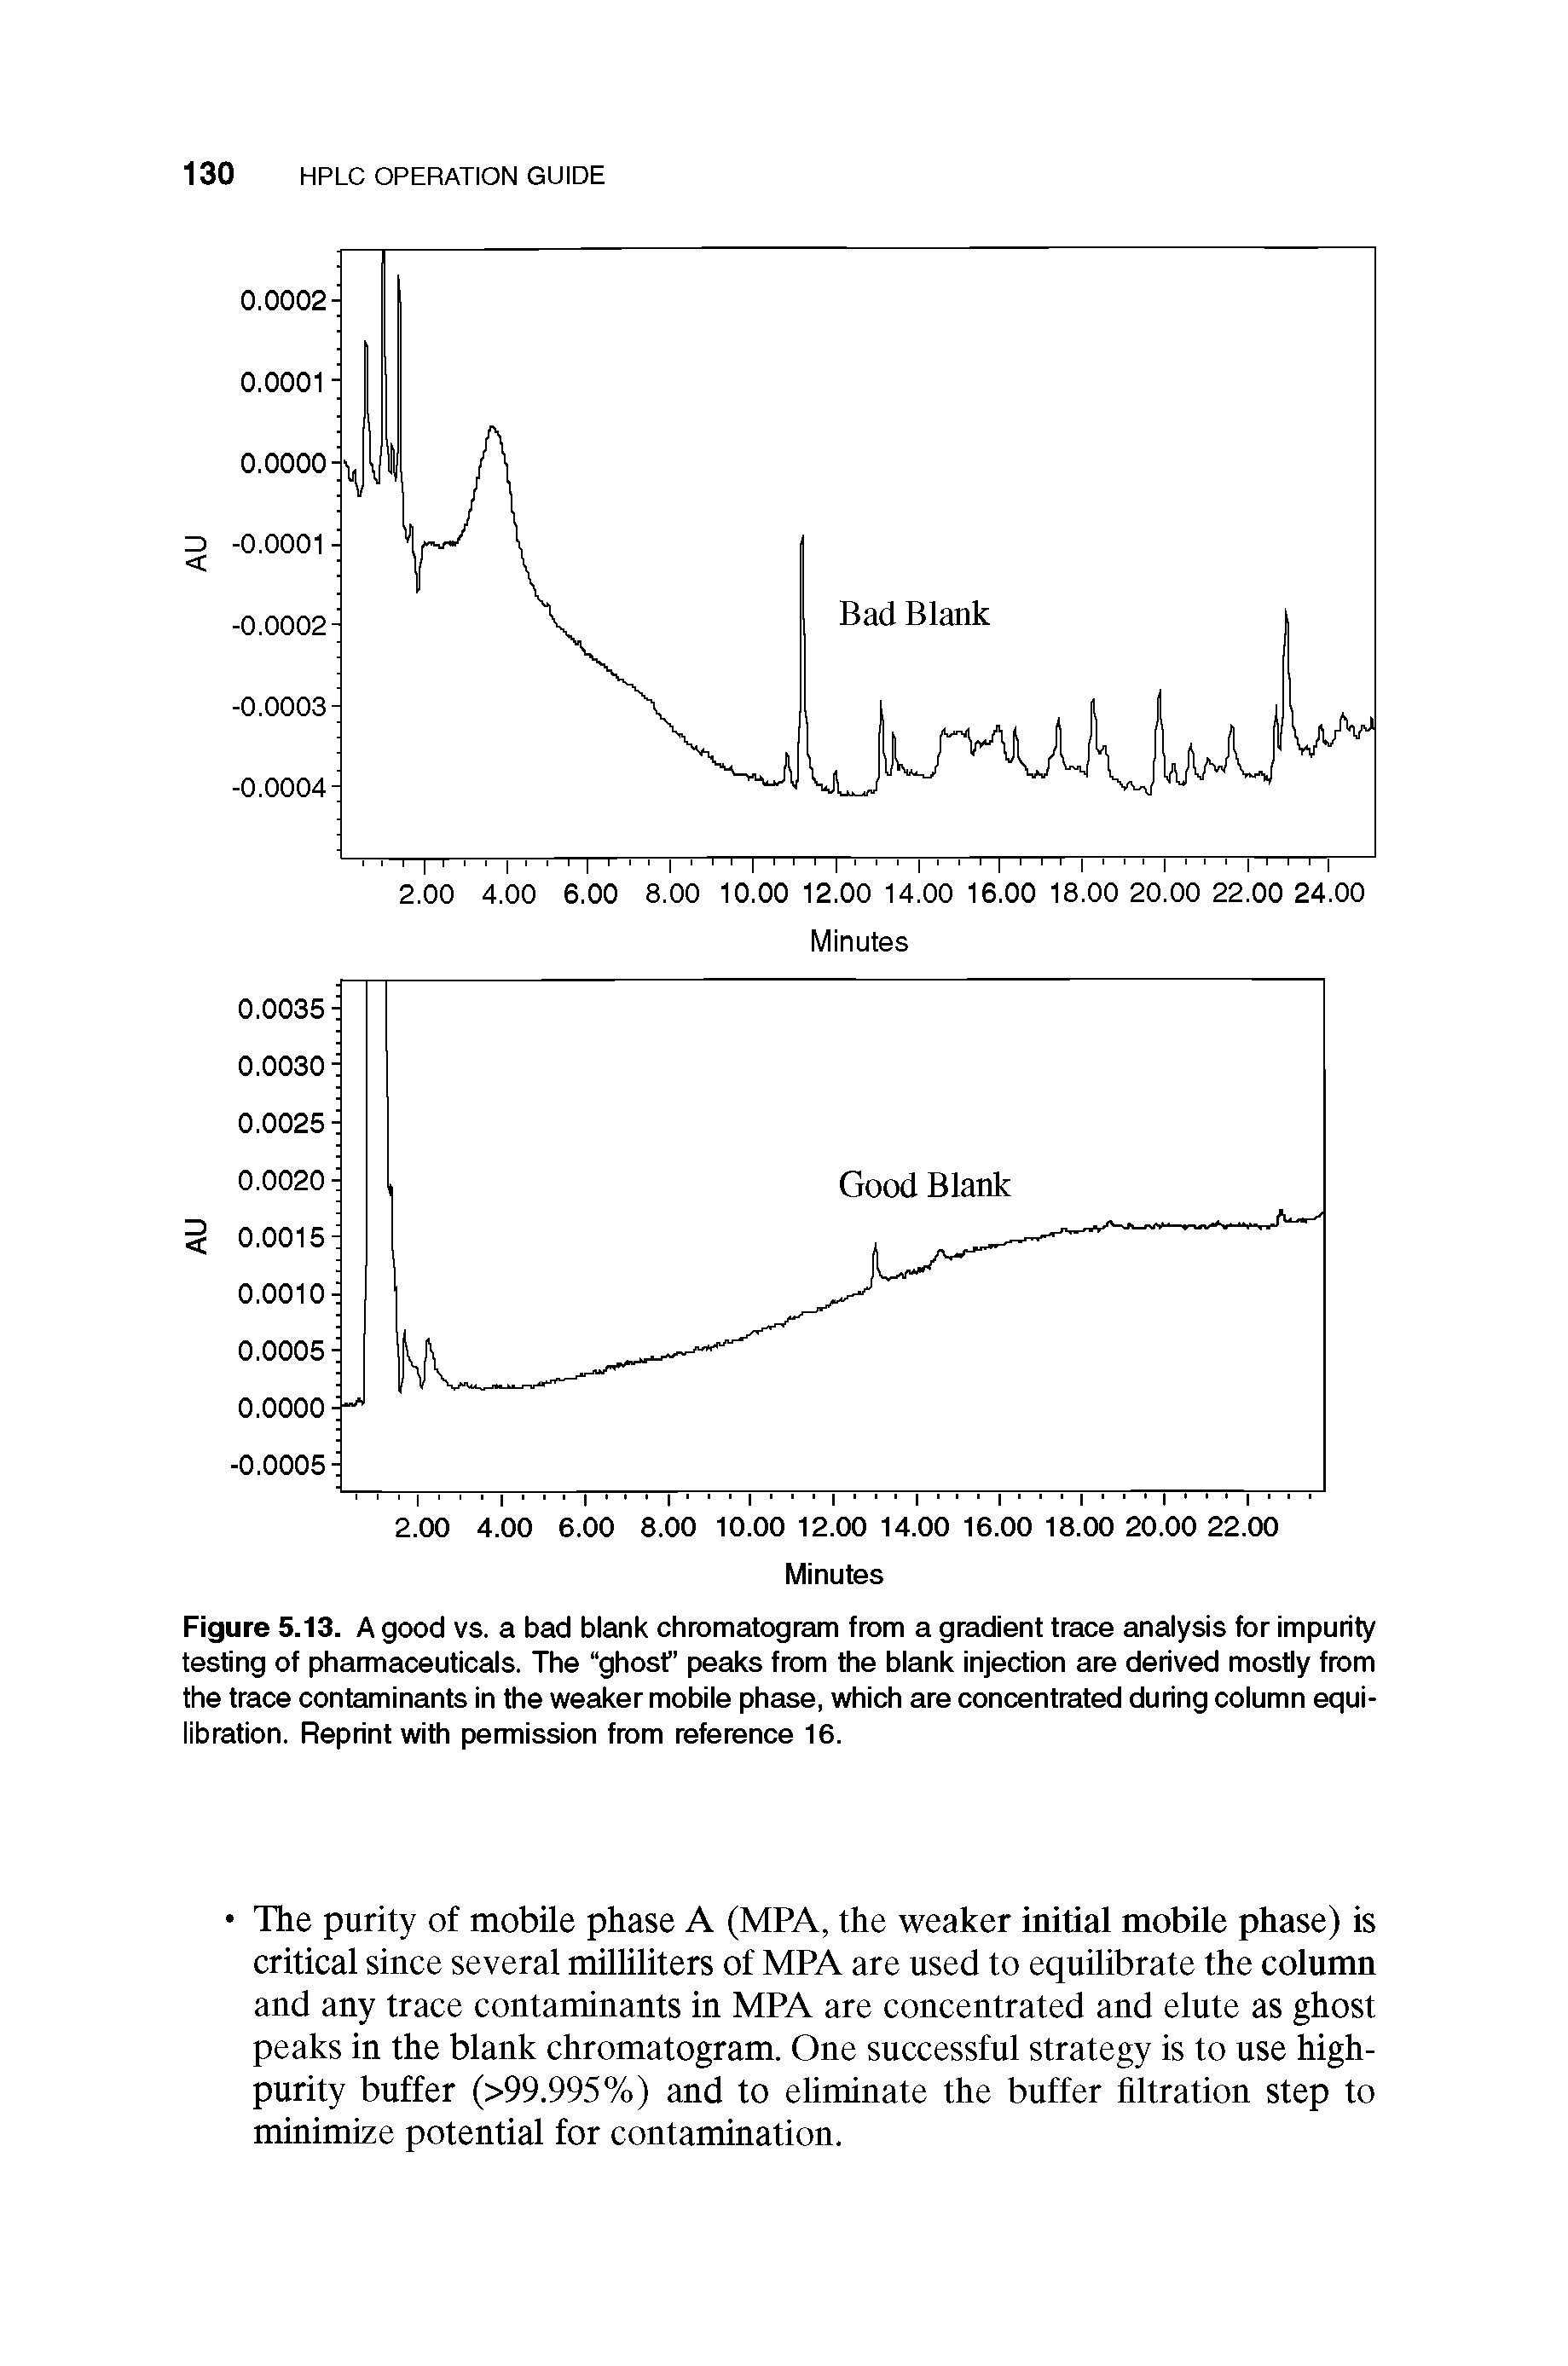 Figure 5.13. A good vs. a bad blank chromatogram from a gradient trace analysis for impurity testing of pharmaceuticals. The ghost peaks from the blank injection are derived mostly from the trace contaminants in the weaker mobile phase, which are concentrated during column equilibration. Reprint with permission from reference 16.